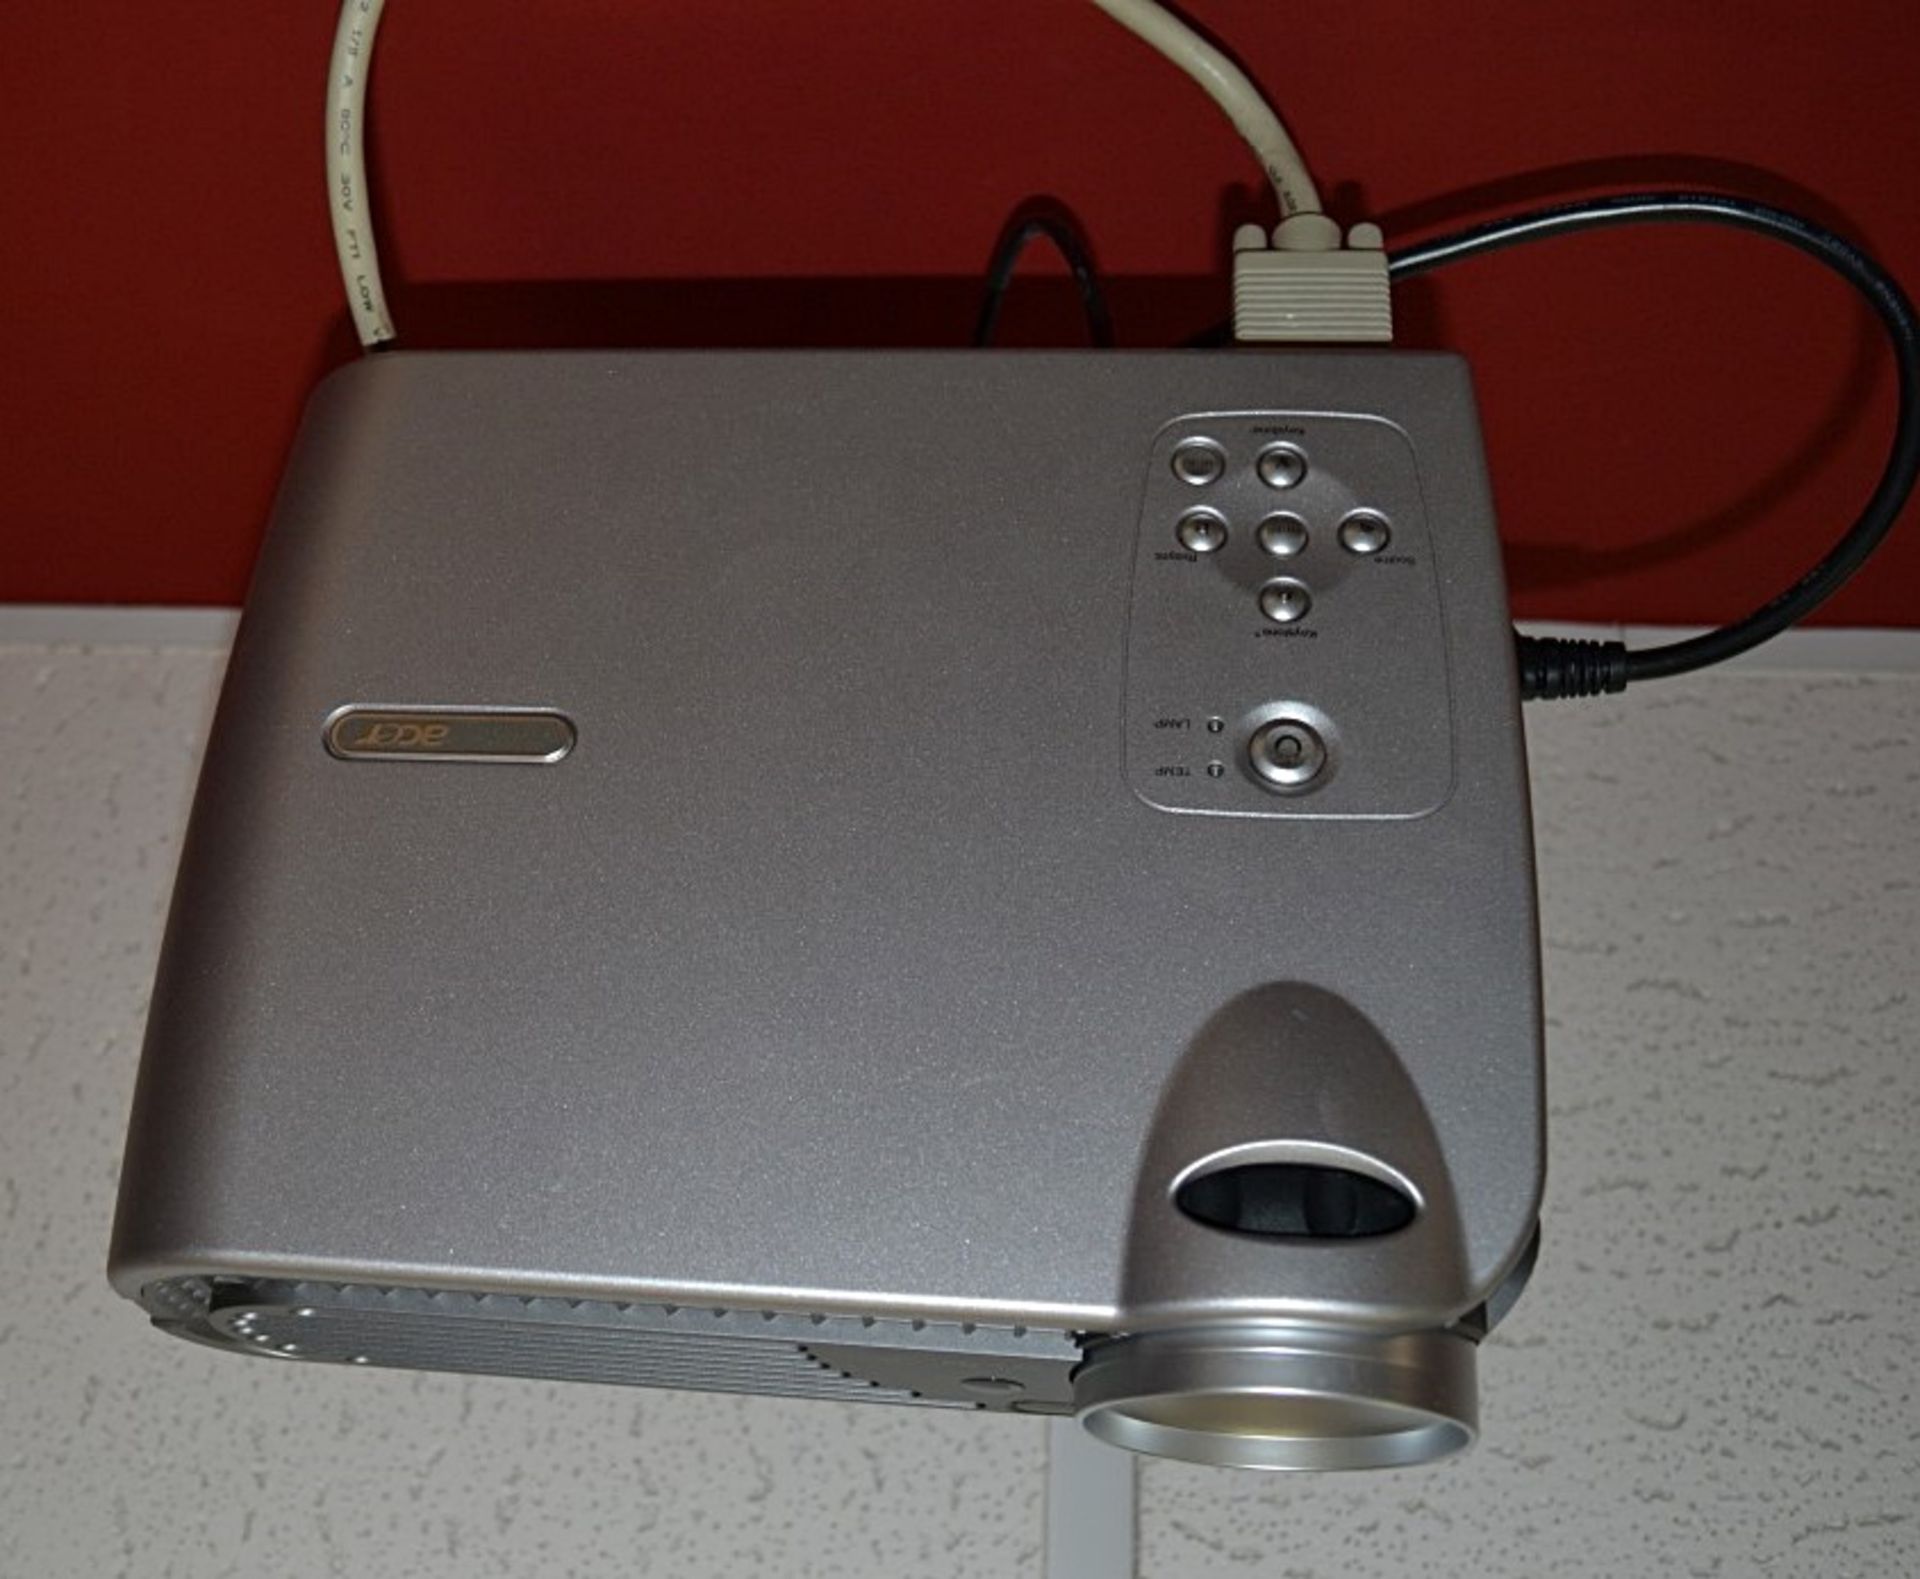 1 x Acer PD112 DLP Projector - Preowned In Good Working Condition With Case And Assorted Leads As - Image 4 of 7